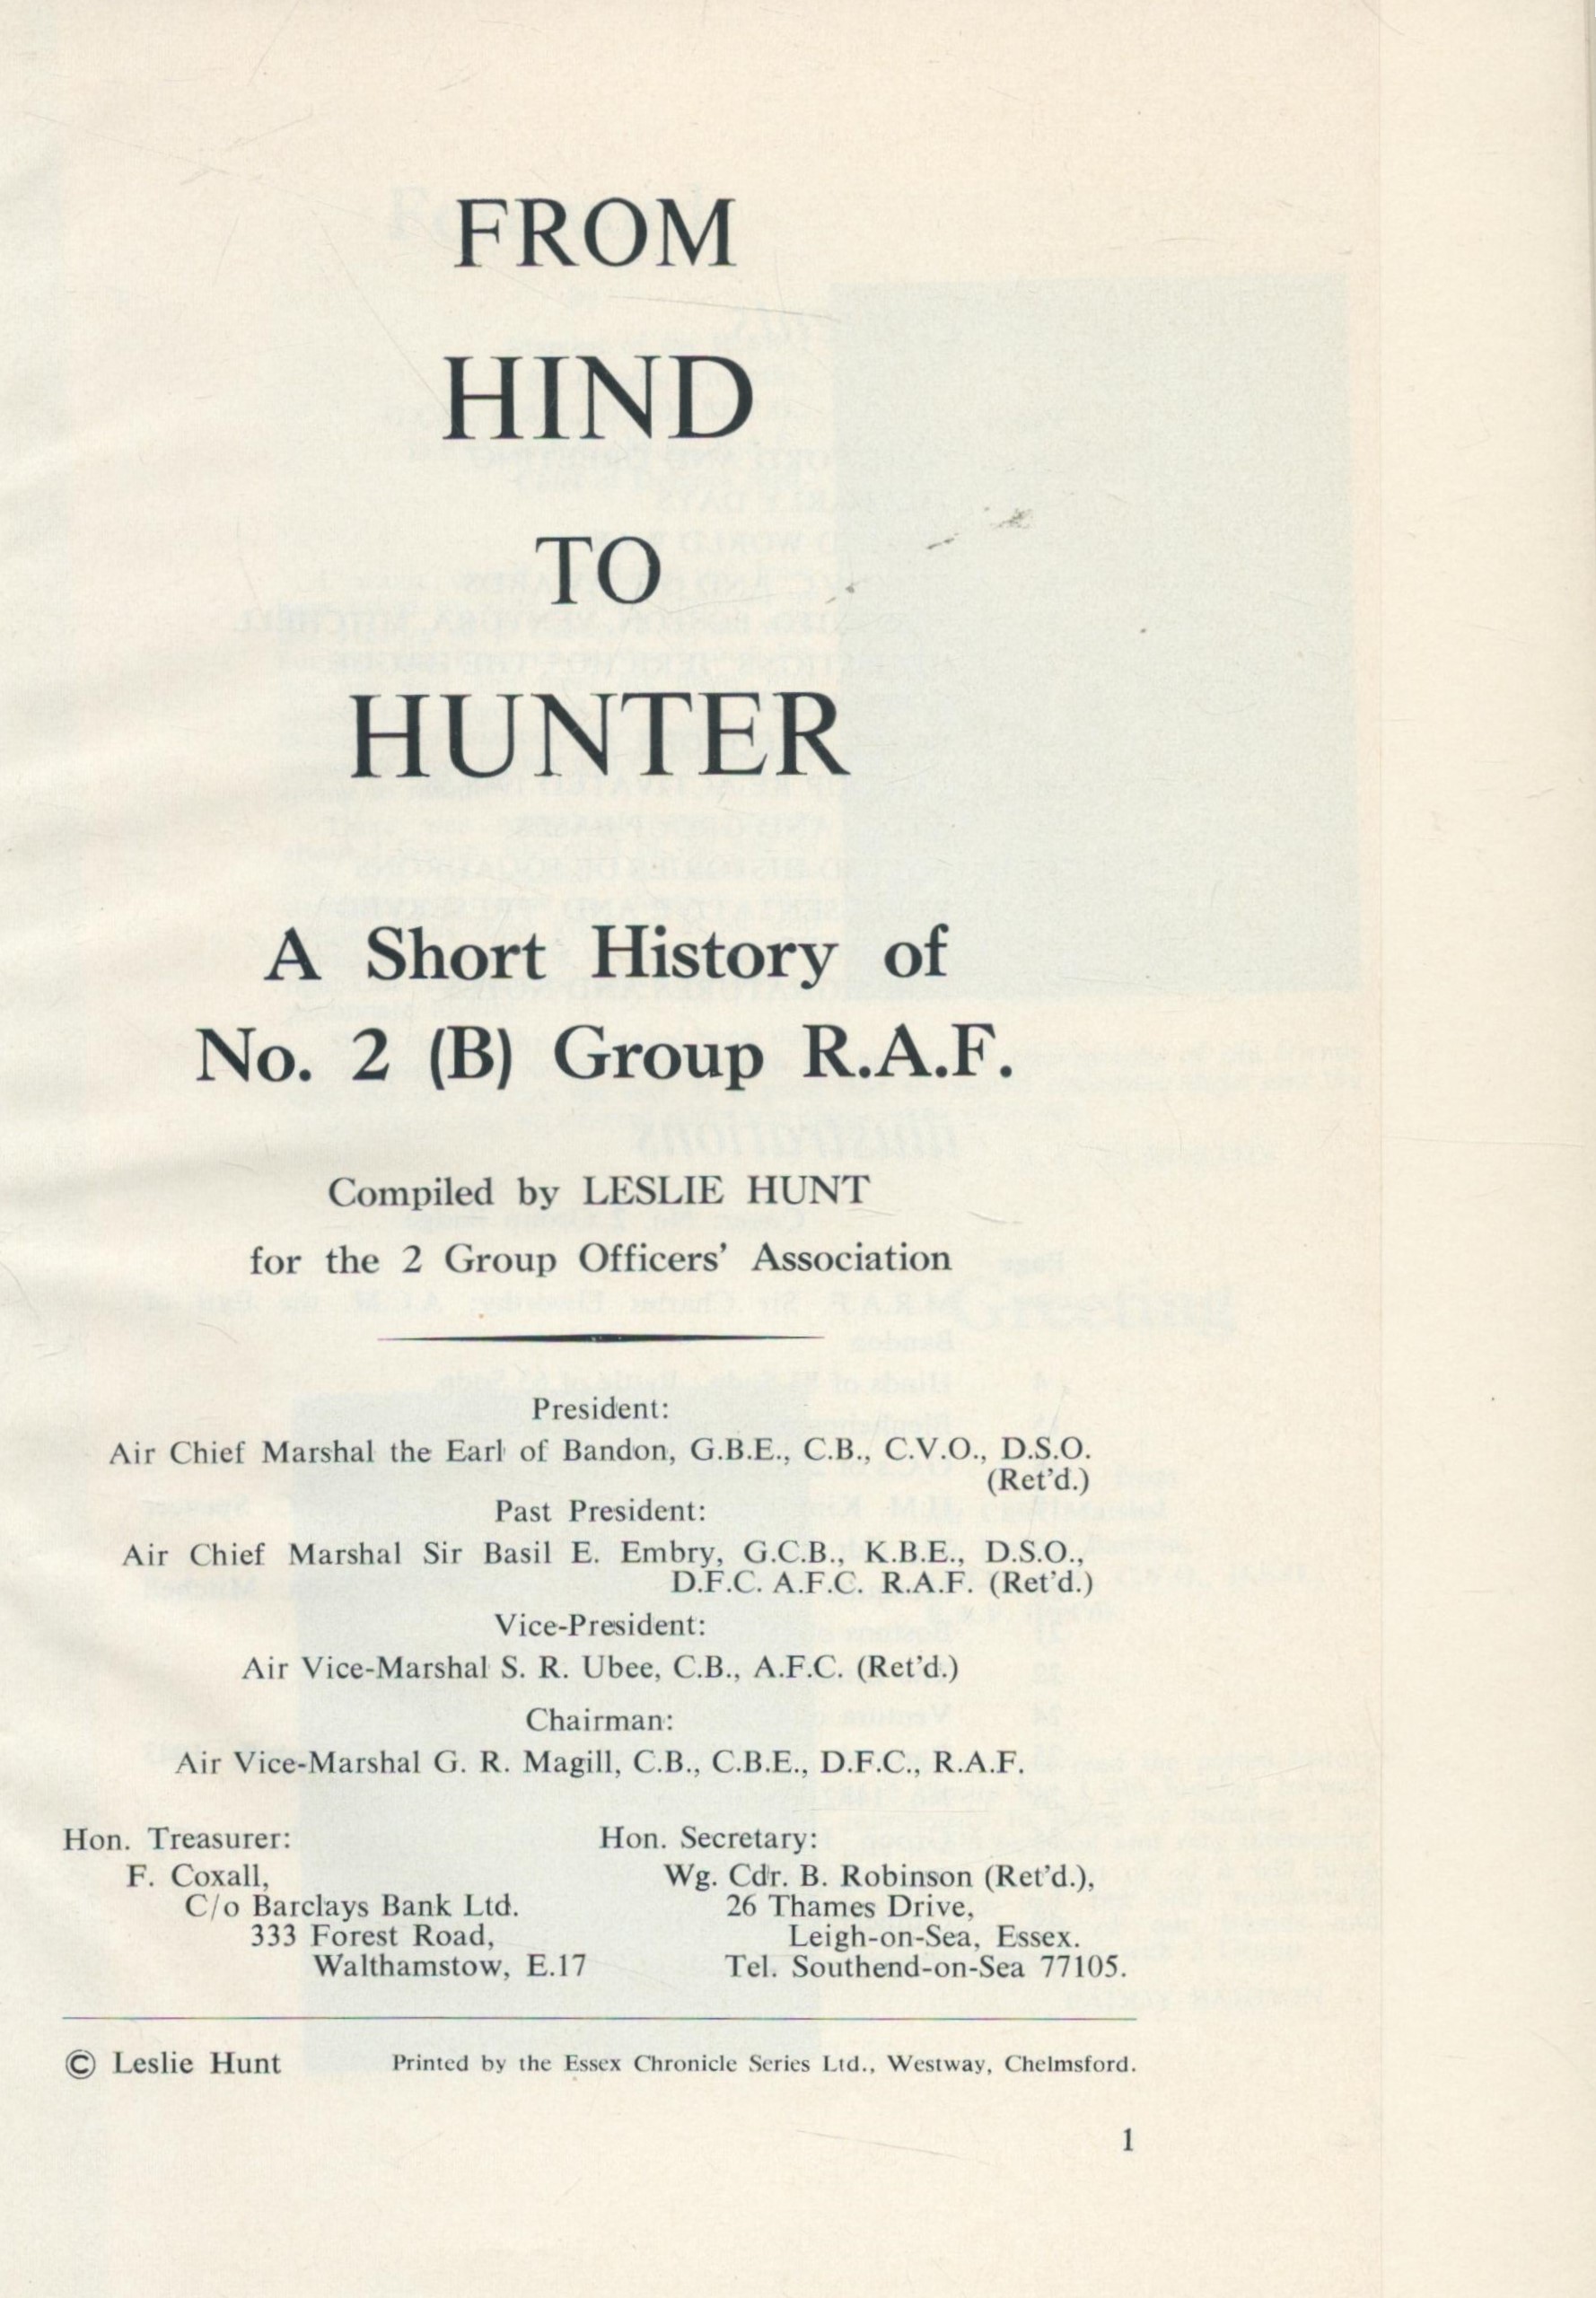 A Short History of No 2 (B) Group R.A.F. compiled by Leslie Hunt Hardback Book printed by Essex - Image 6 of 6